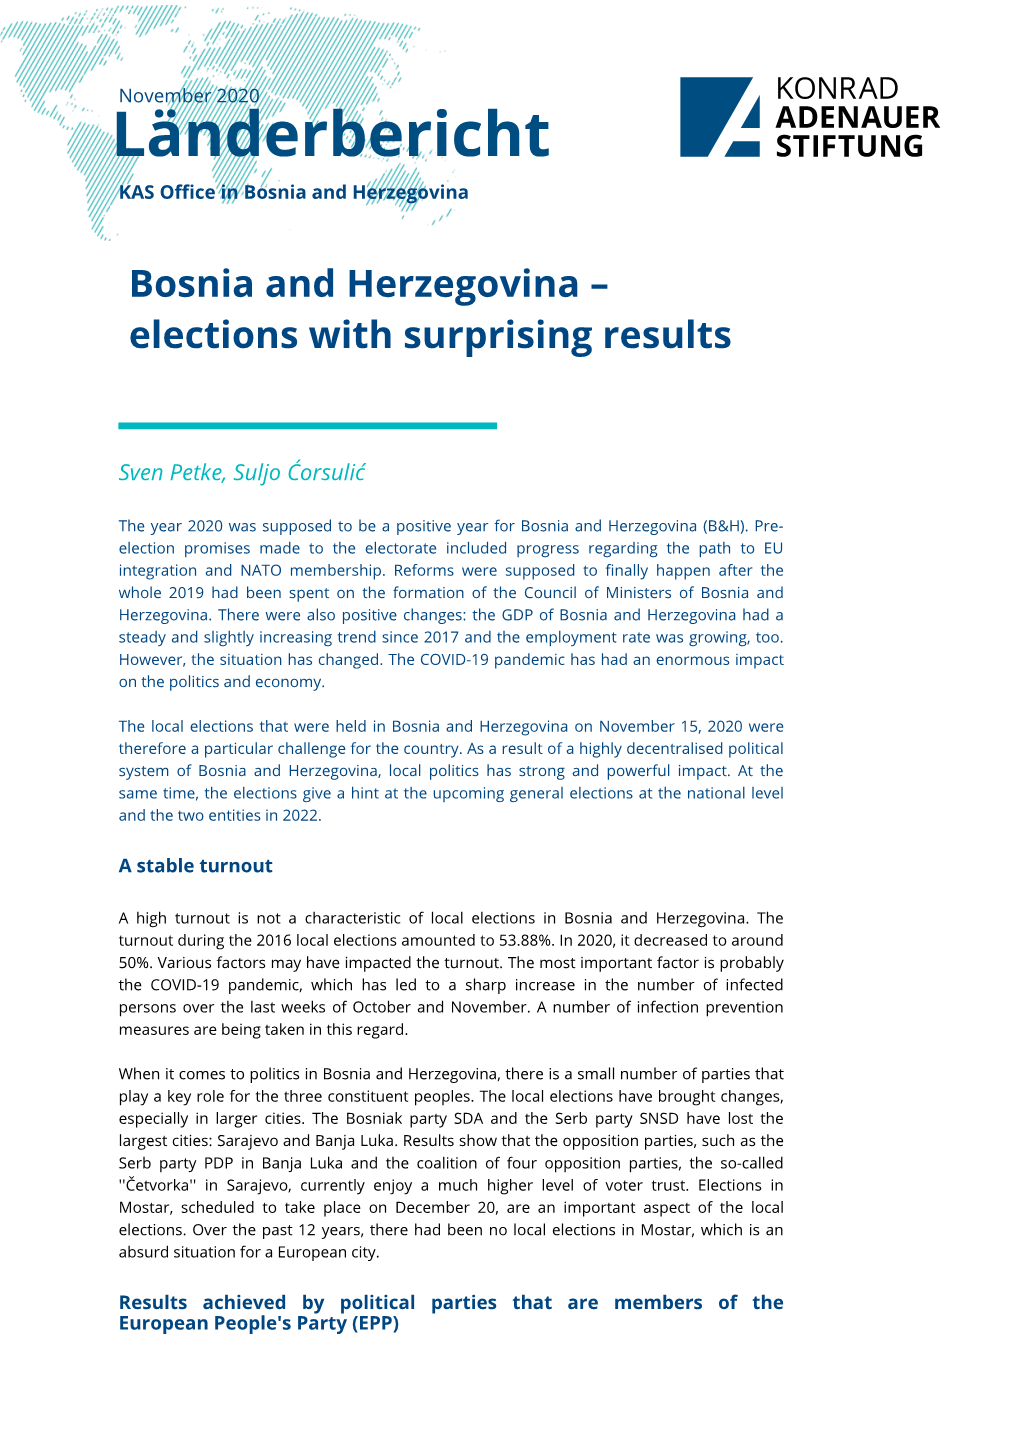 Bosnia and Herzegovina – Elections with Surprising Results